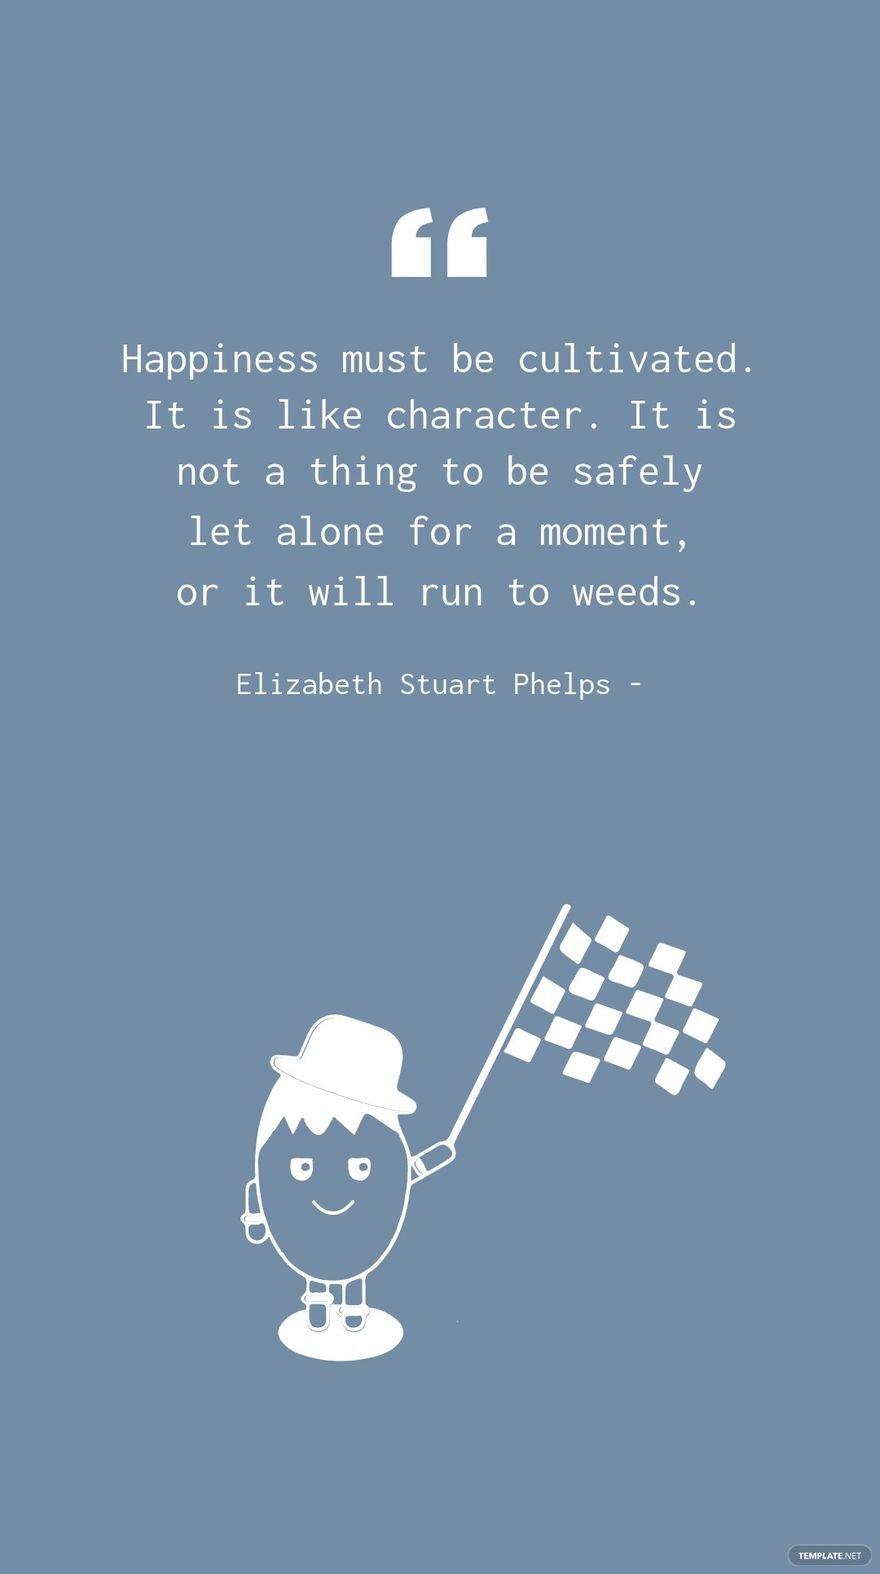 Elizabeth Stuart Phelps - Happiness must be cultivated. It is like character. It is not a thing to be safely let alone for a moment, or it will run to weeds.